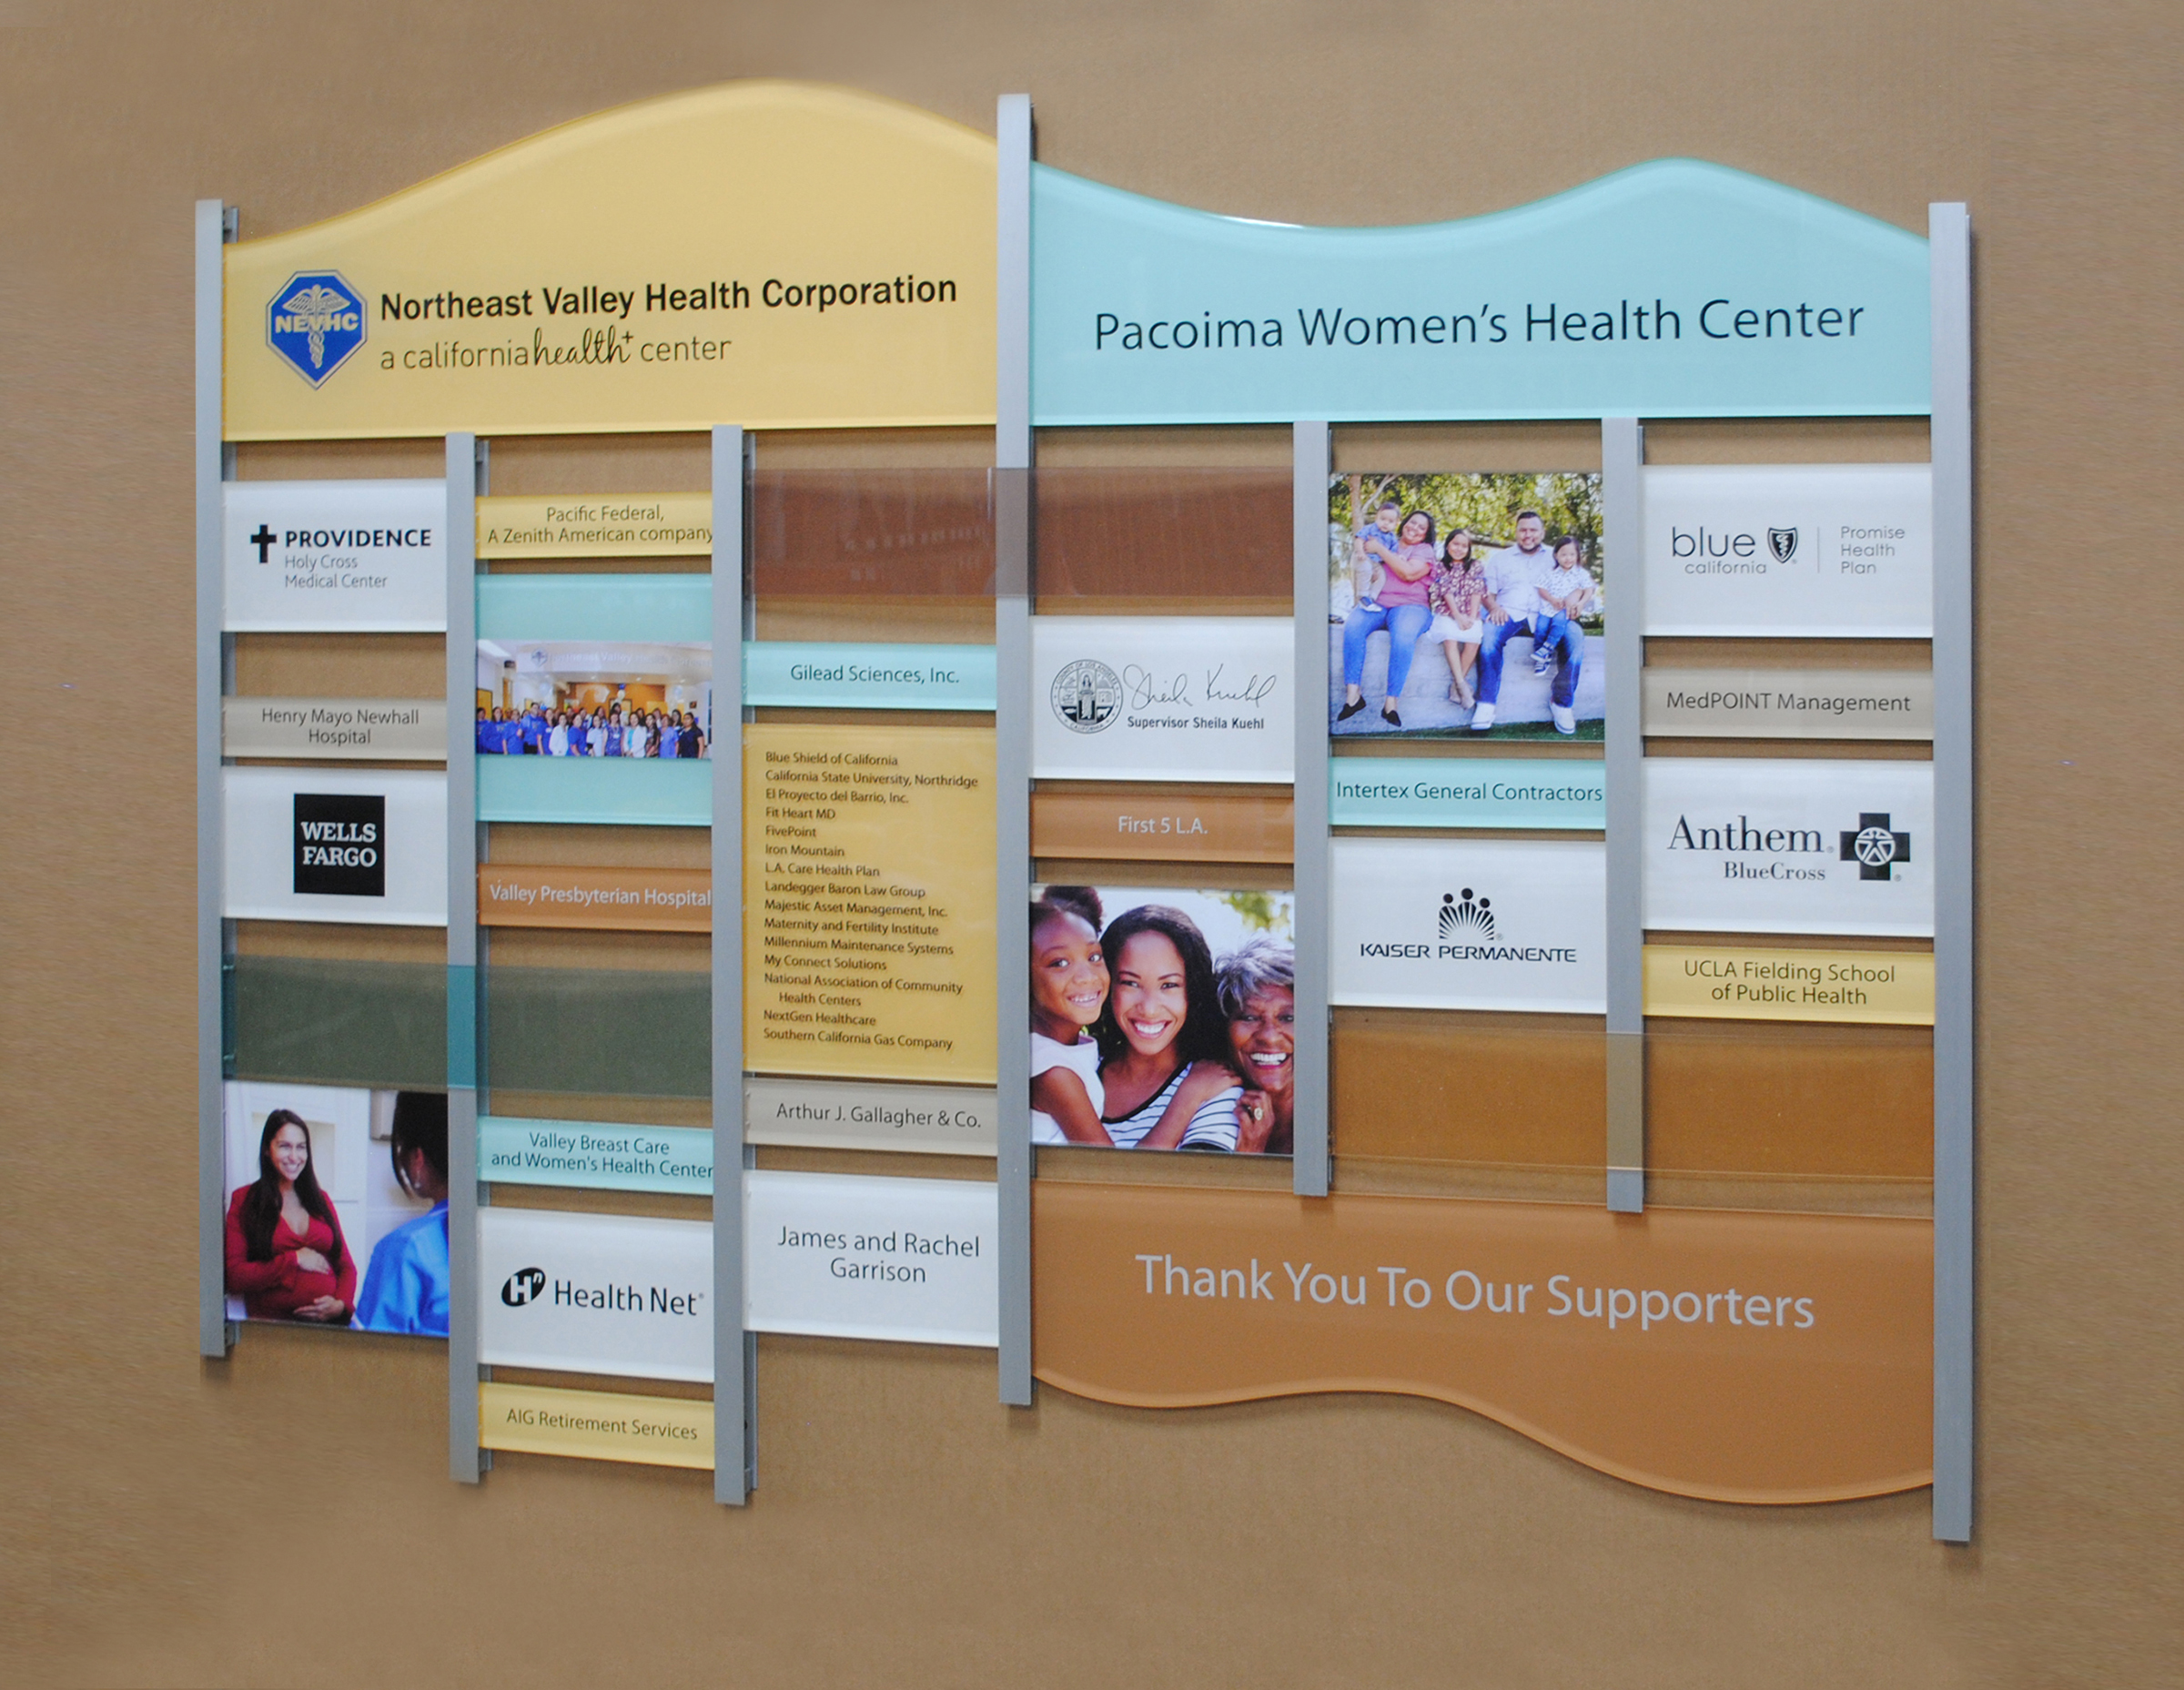 Polaris System, Cumulative Giving Display, Large Printed Graphics, Contemporary Display, Women's Health Center Display, Changeable Display